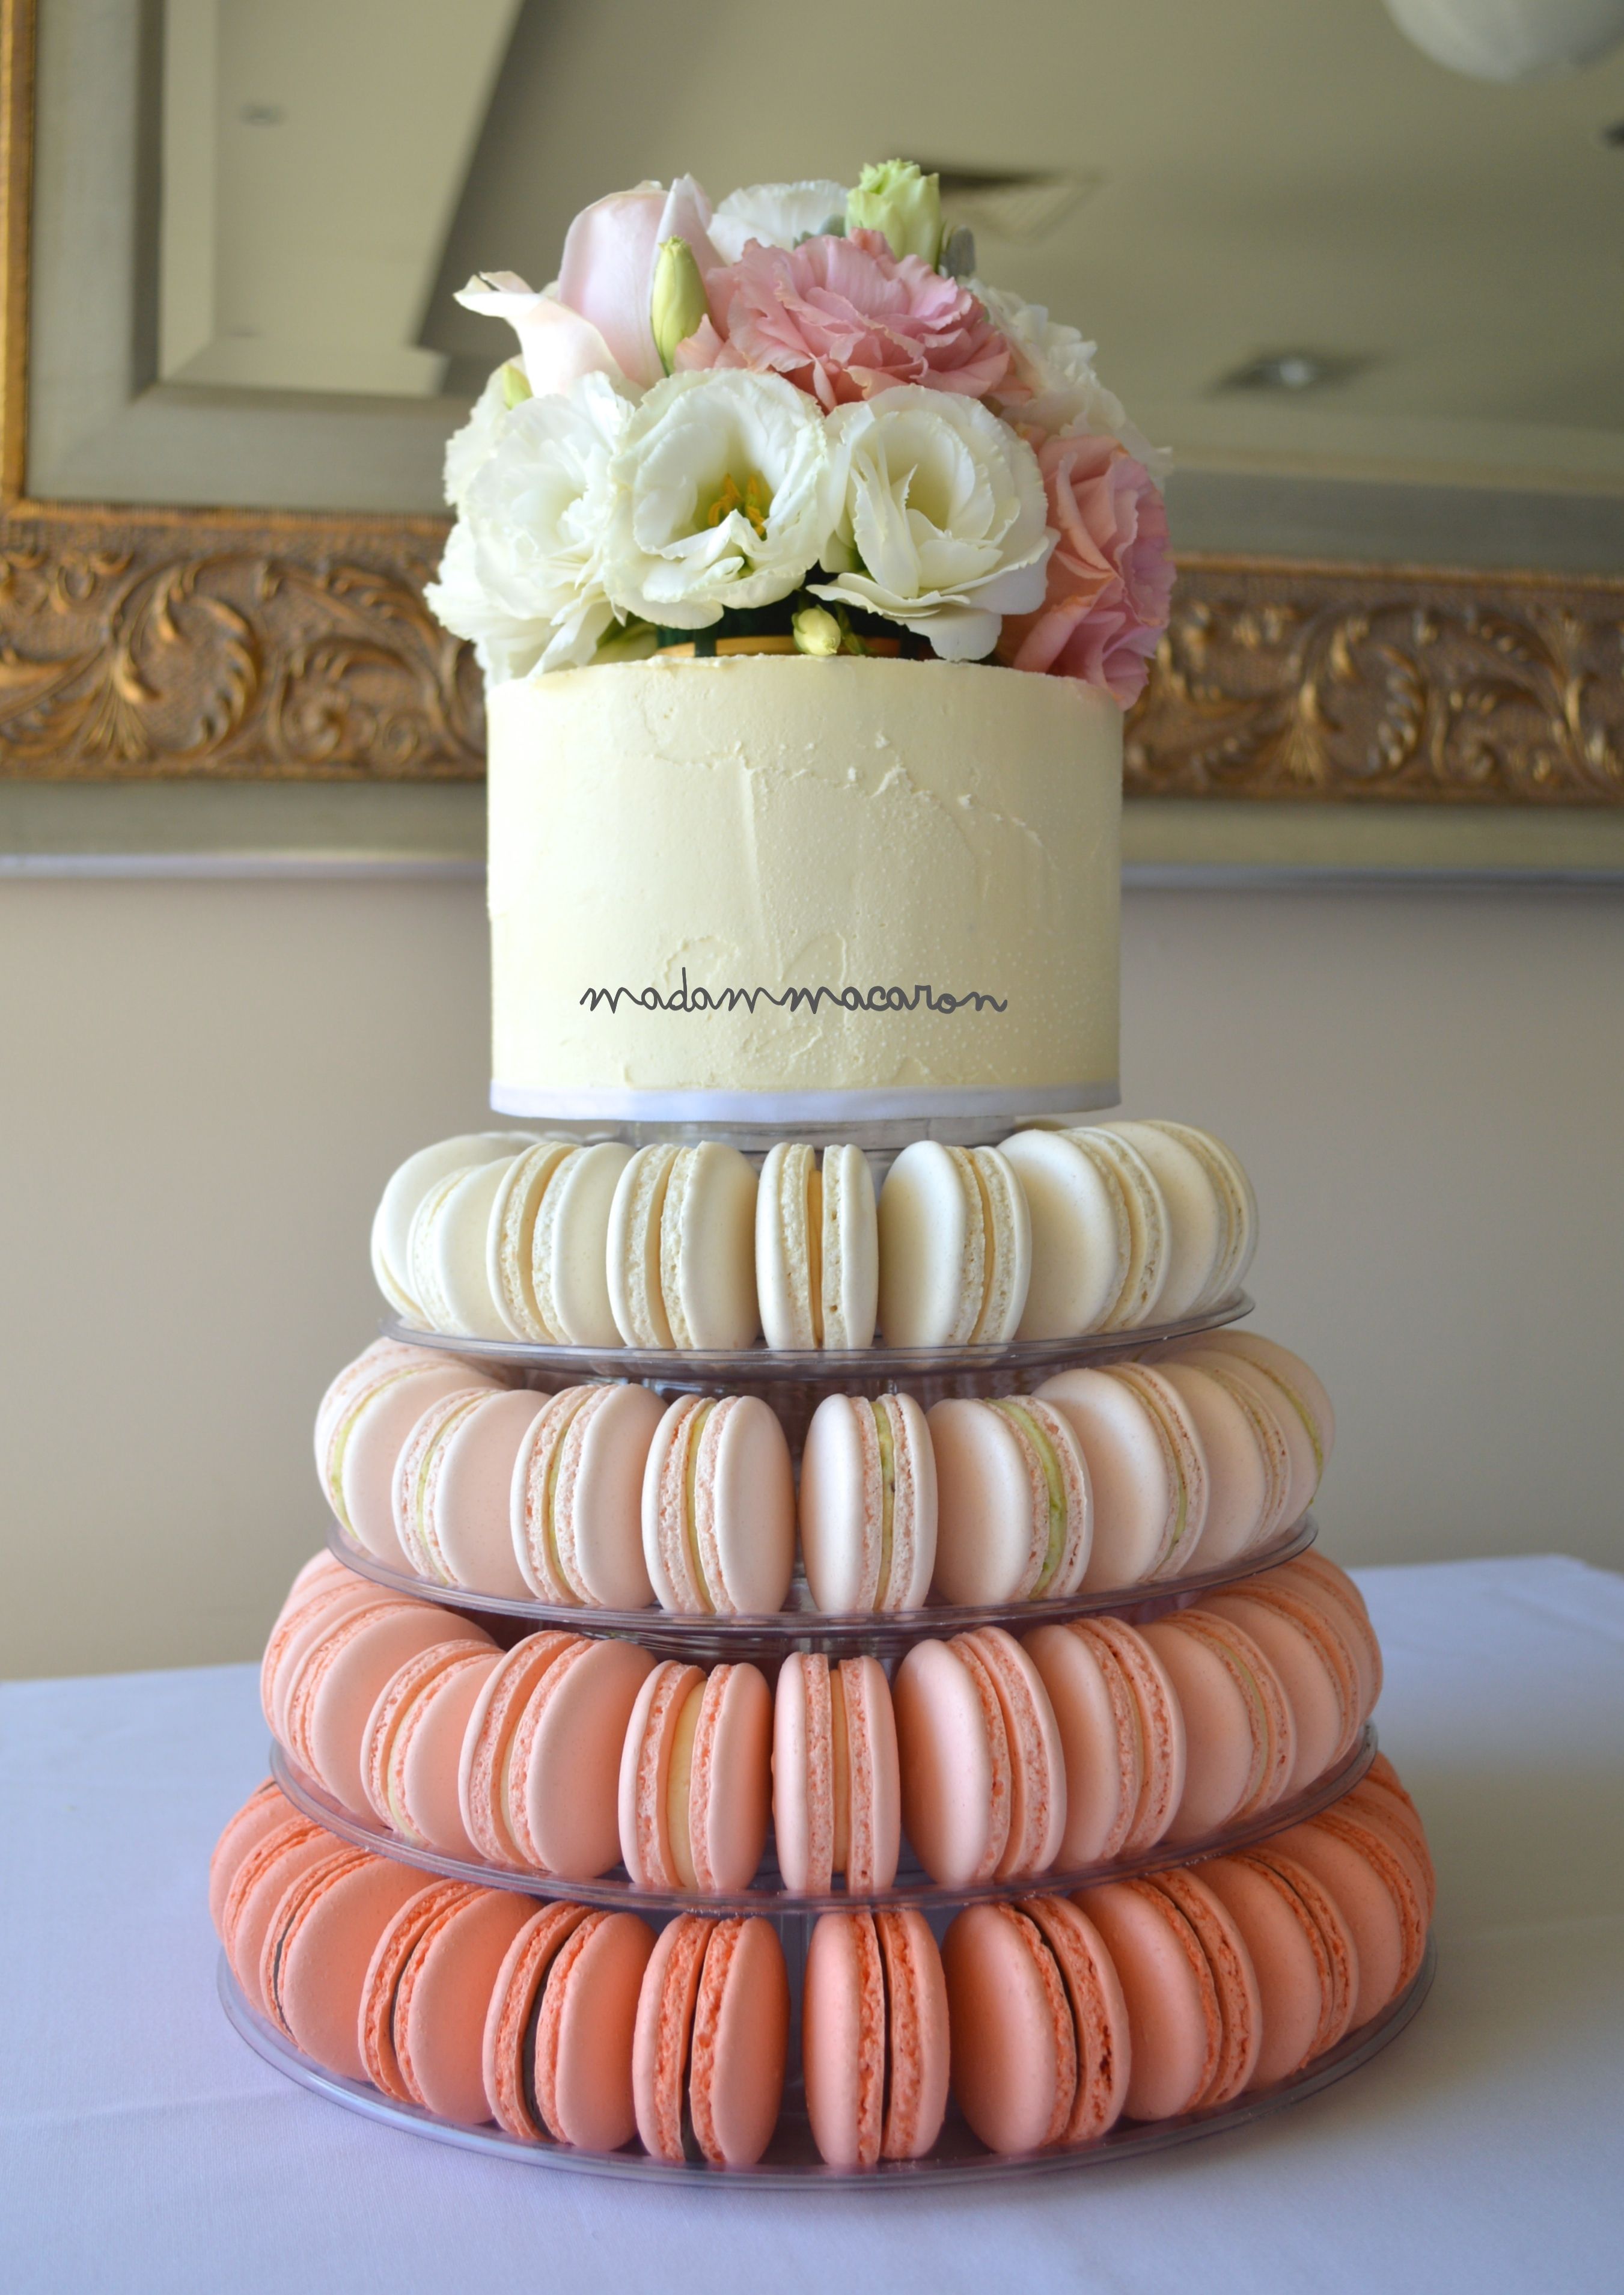 Peach Ombre macaron tower, buttercream cake on top finished with ...